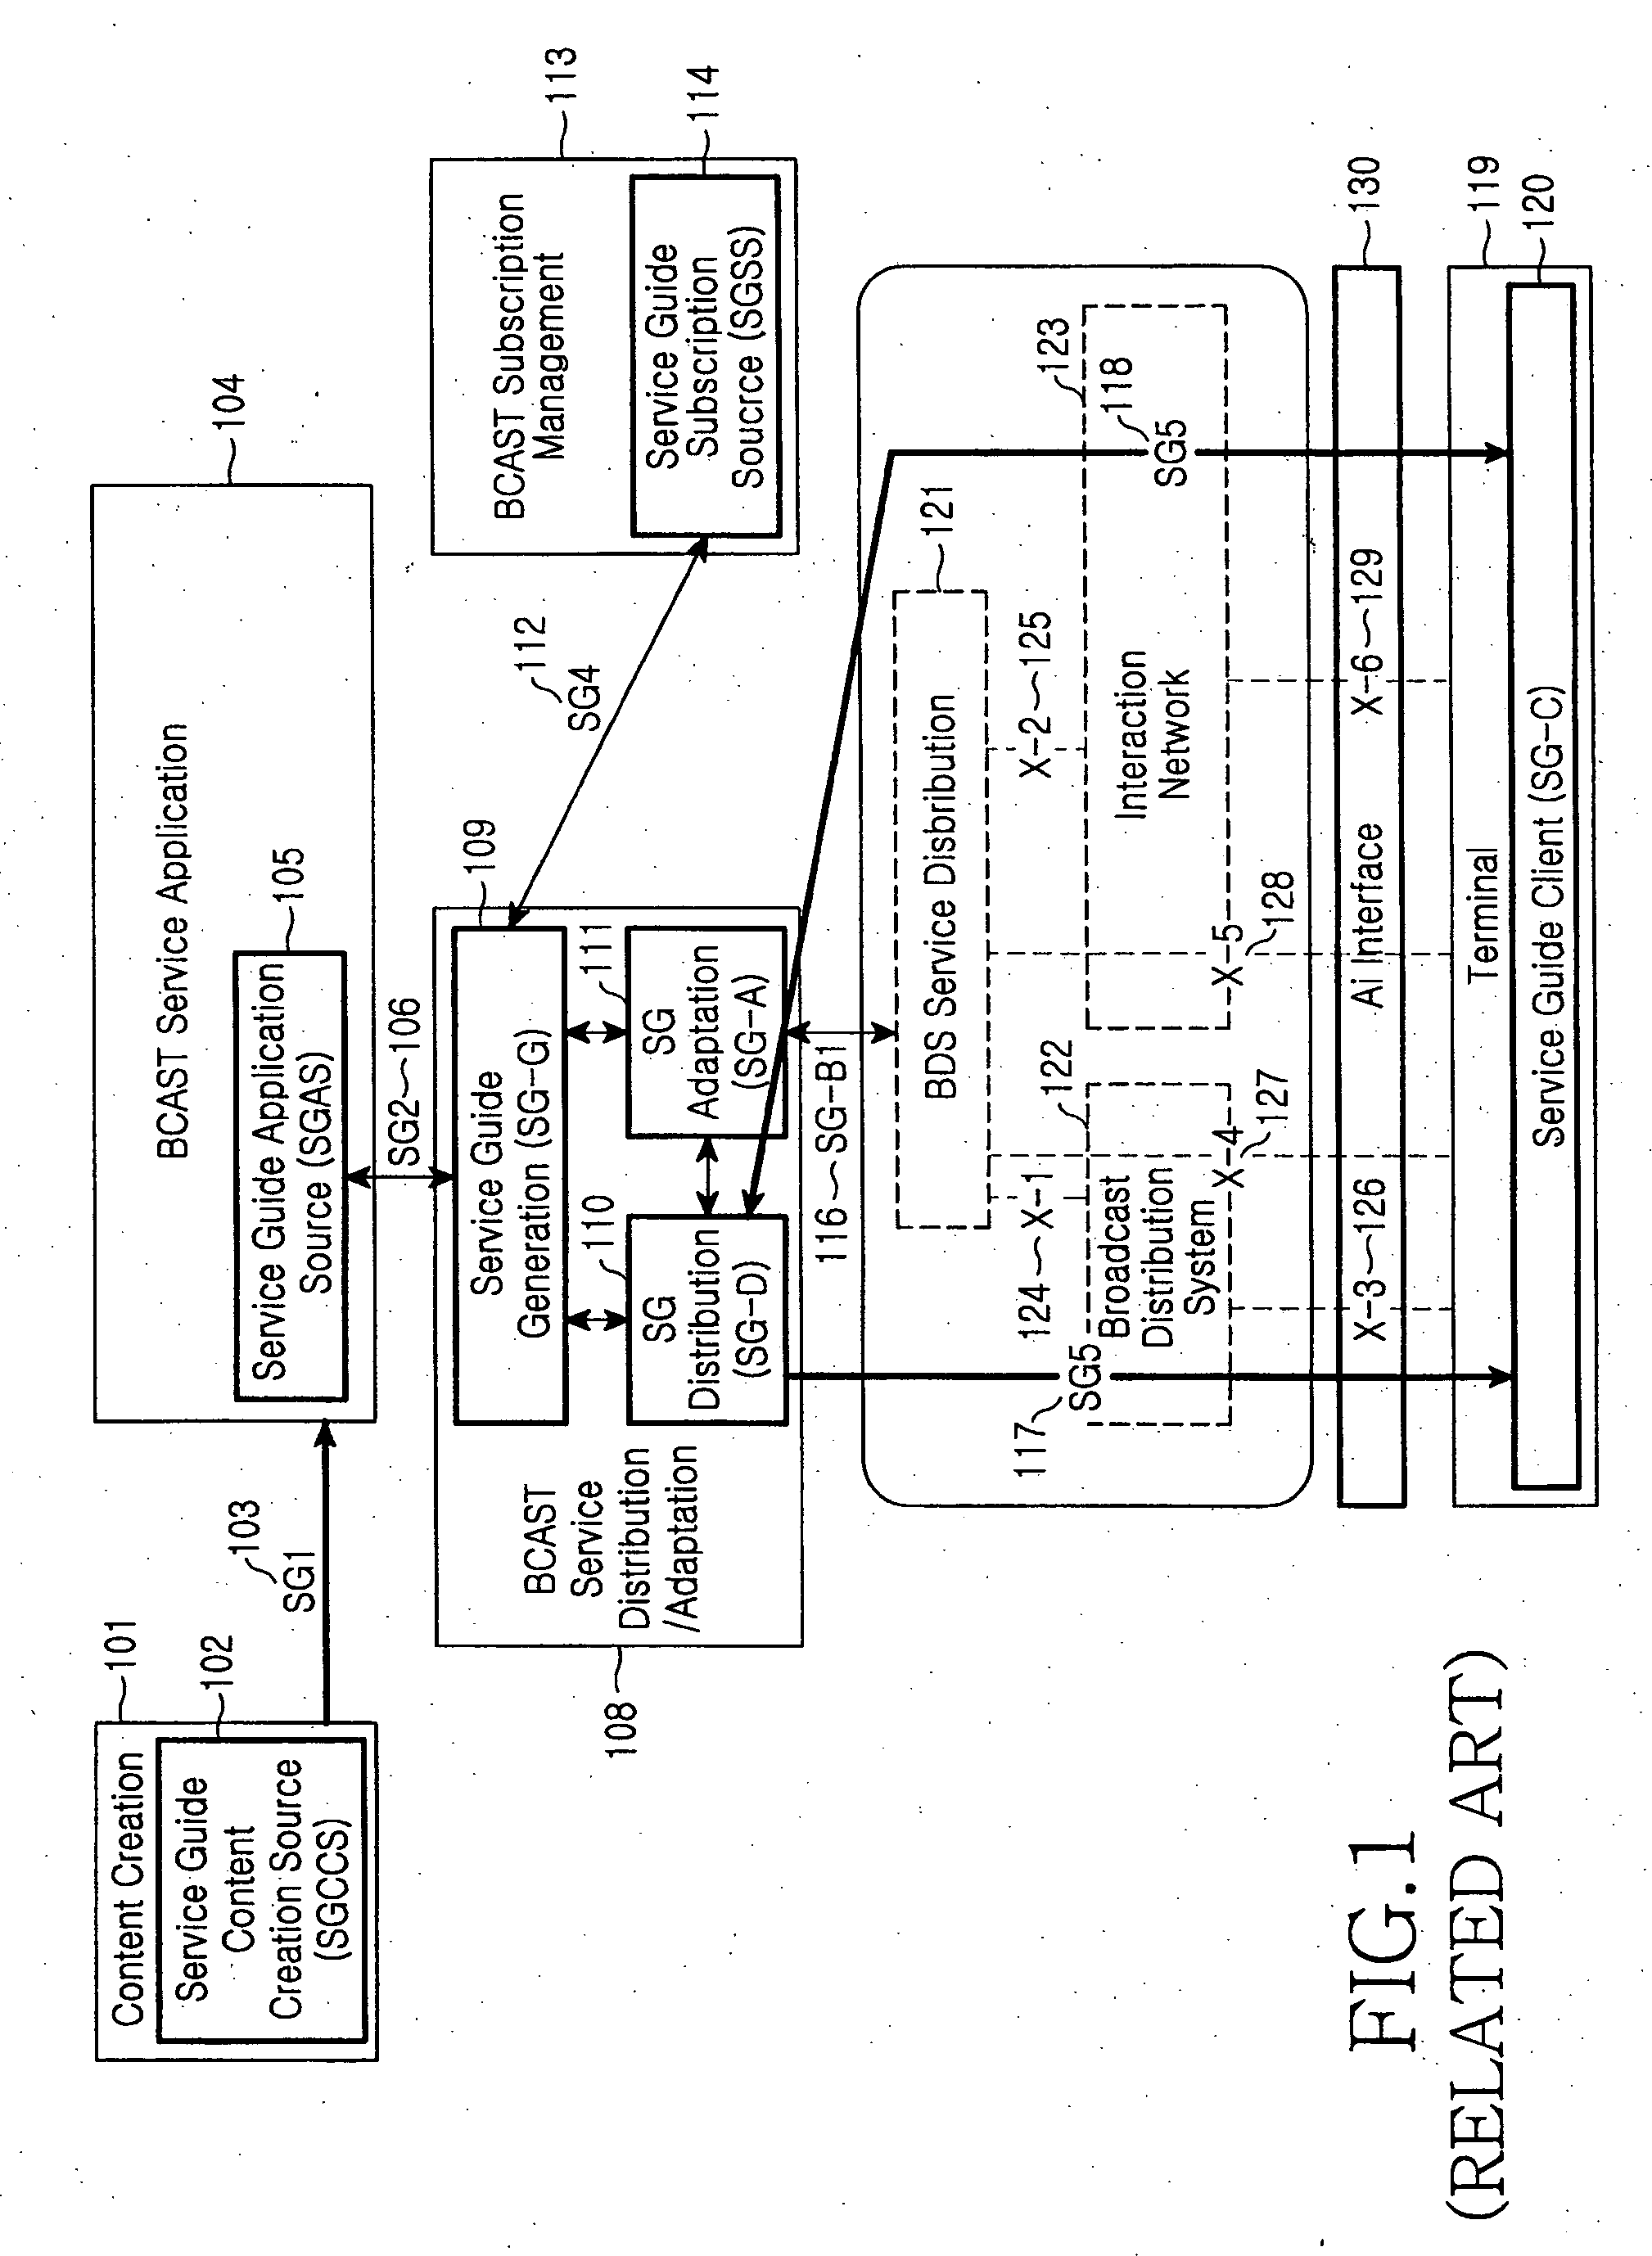 Method for delivering service guide source for generation of service guide in a mobile broadcast system, and method and system for delivering notification event/notification message